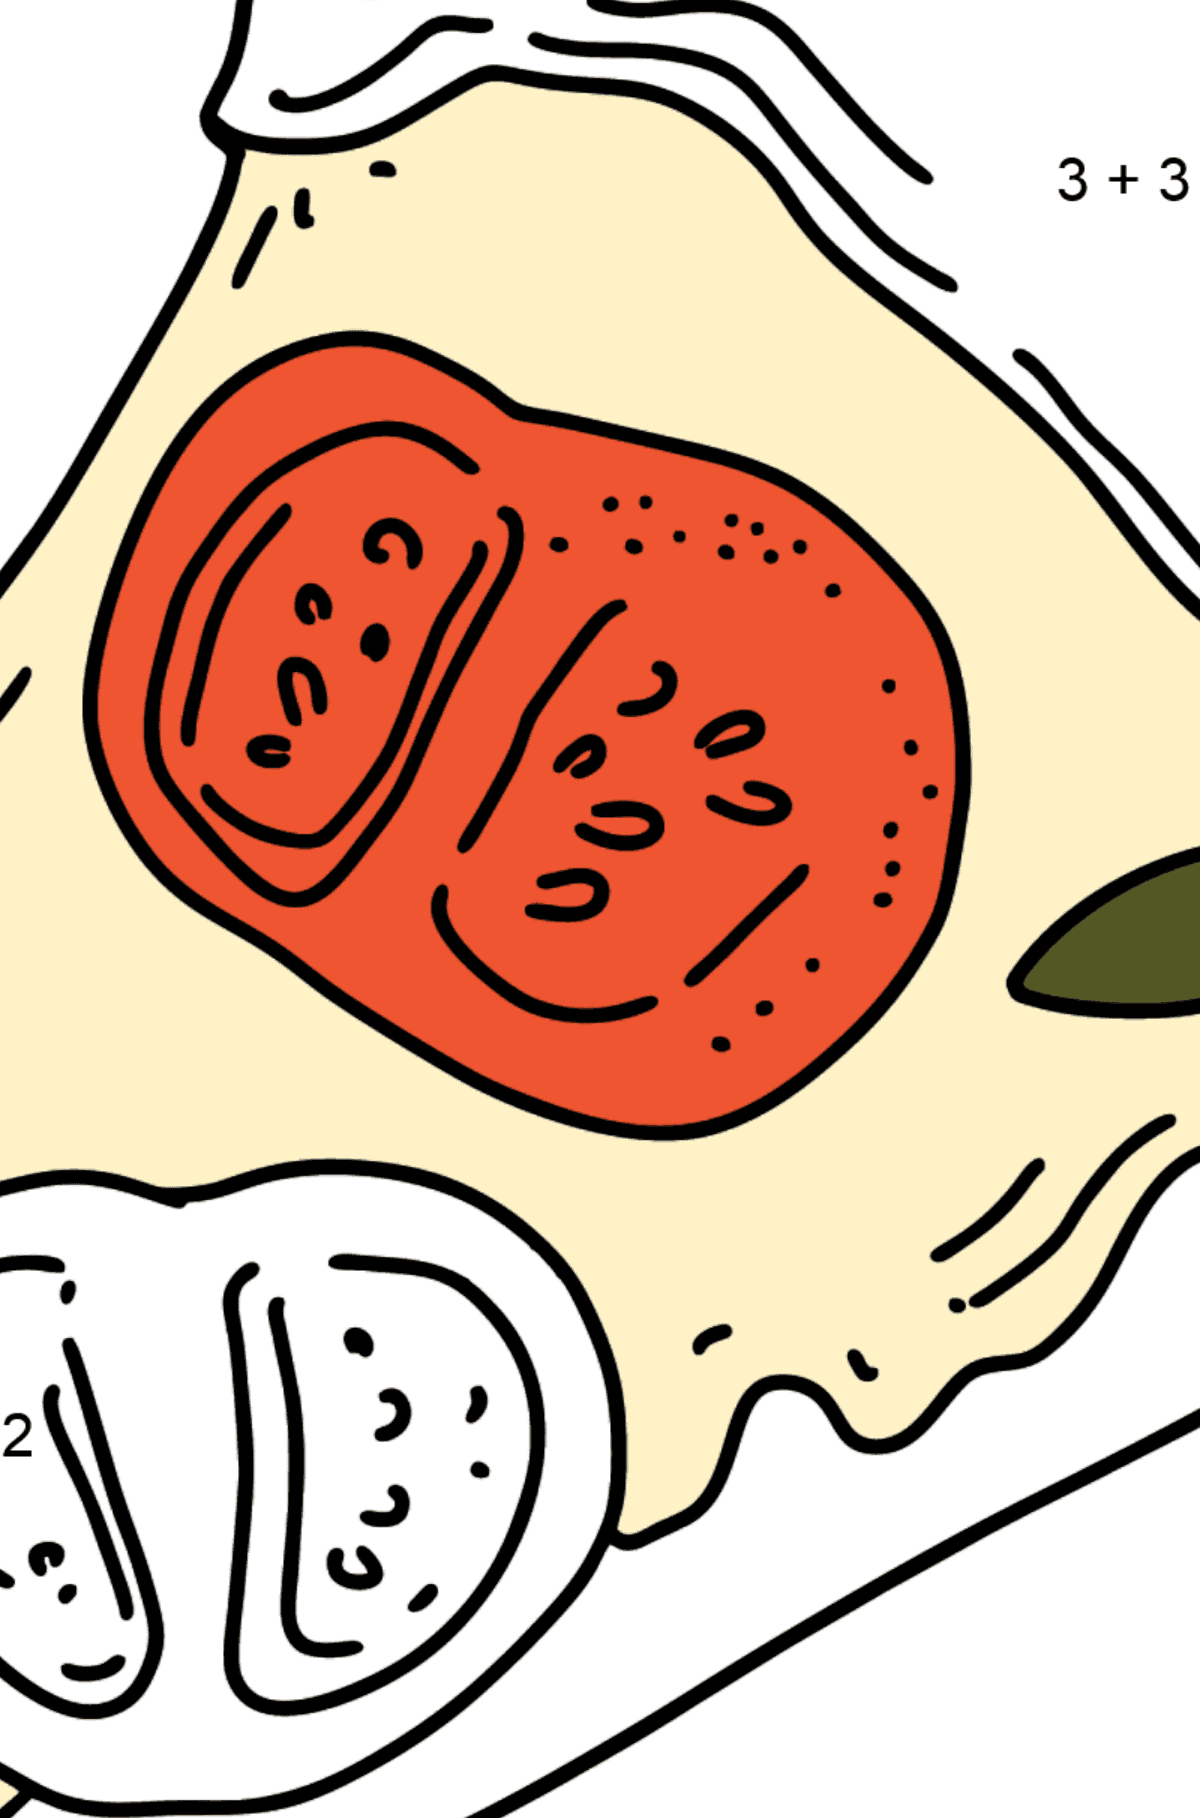 Tomato Pizza coloring page - Math Coloring - Addition for Kids